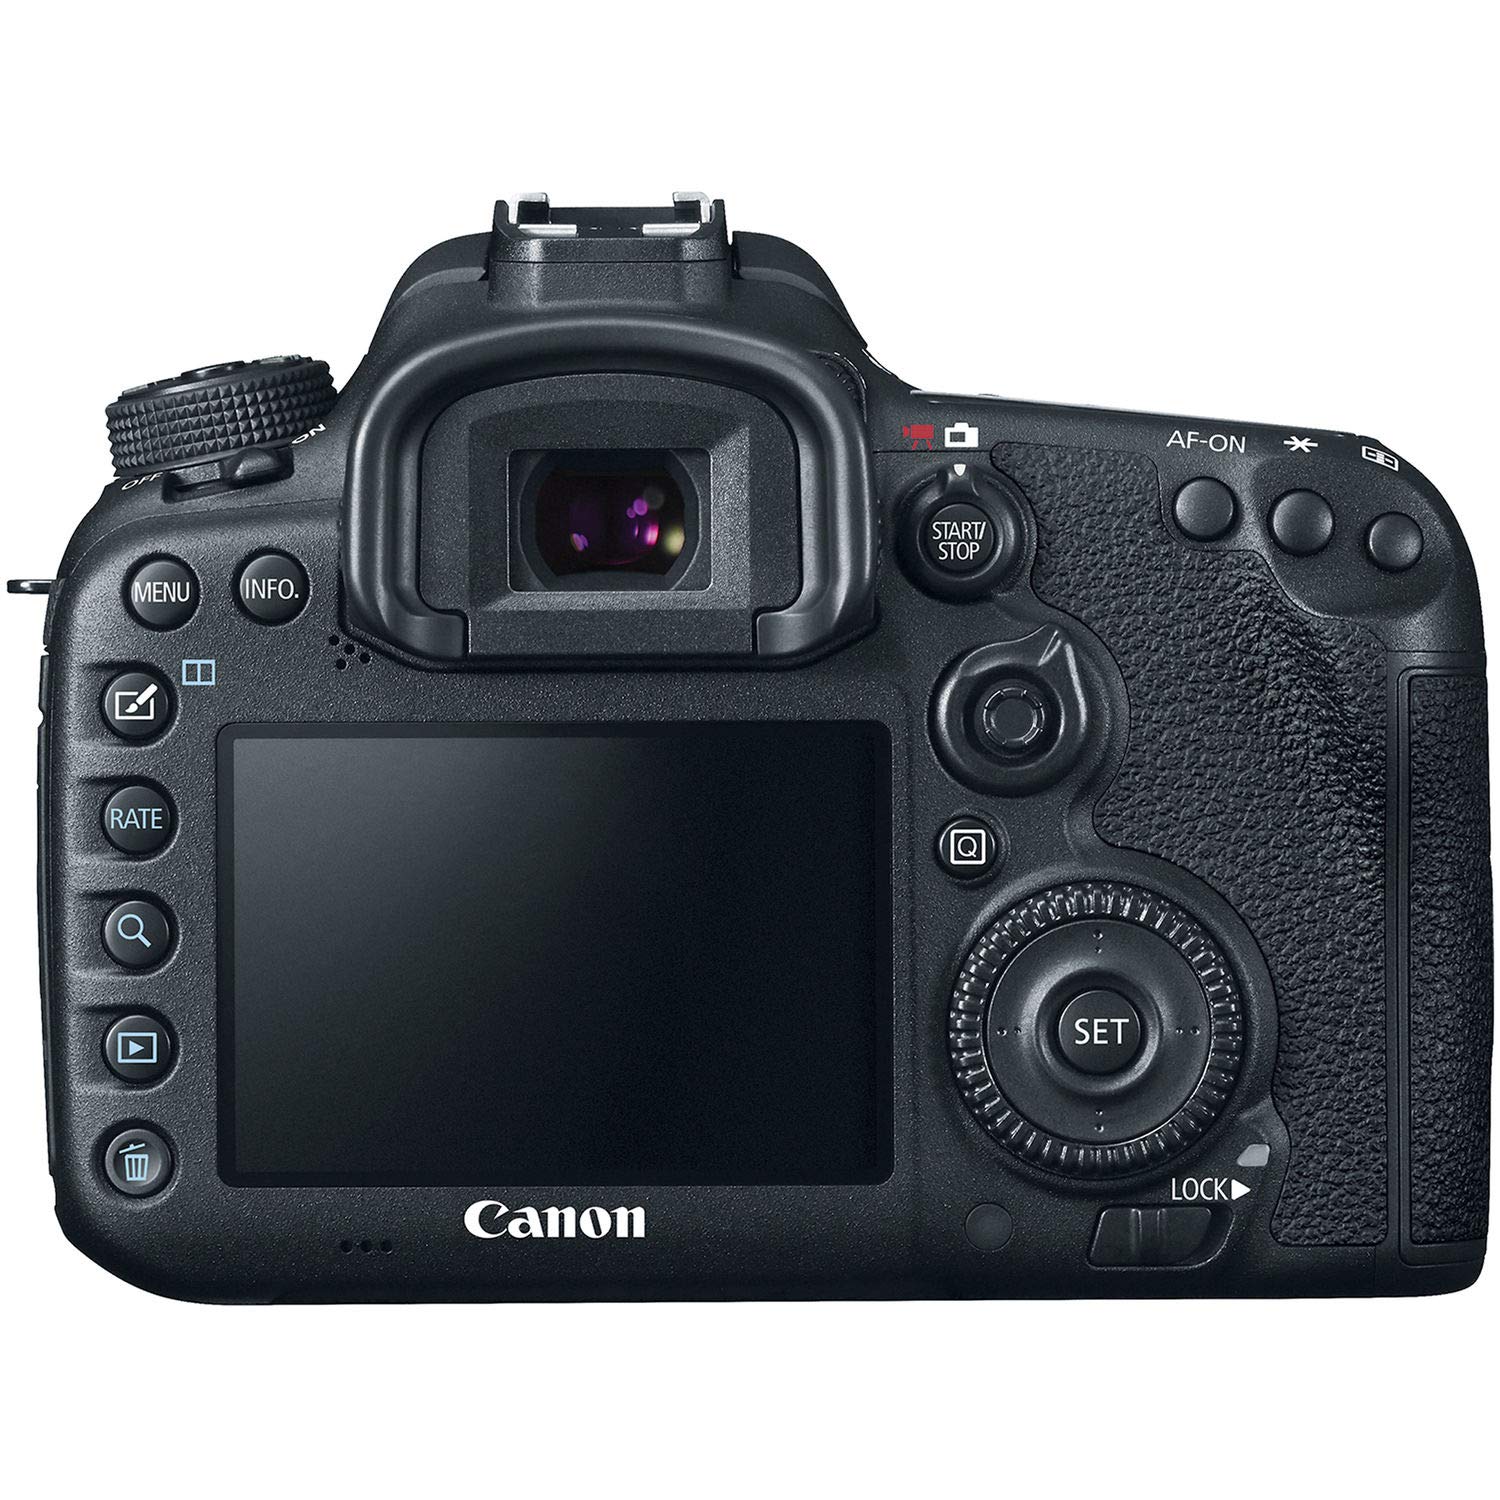 Canon EOS 7D Mark II DSLR Camera (Intl Model) with 18-135mm Lens & W-E1 Wi-Fi Adapter With Memory Card Kit and Cleaning Kit